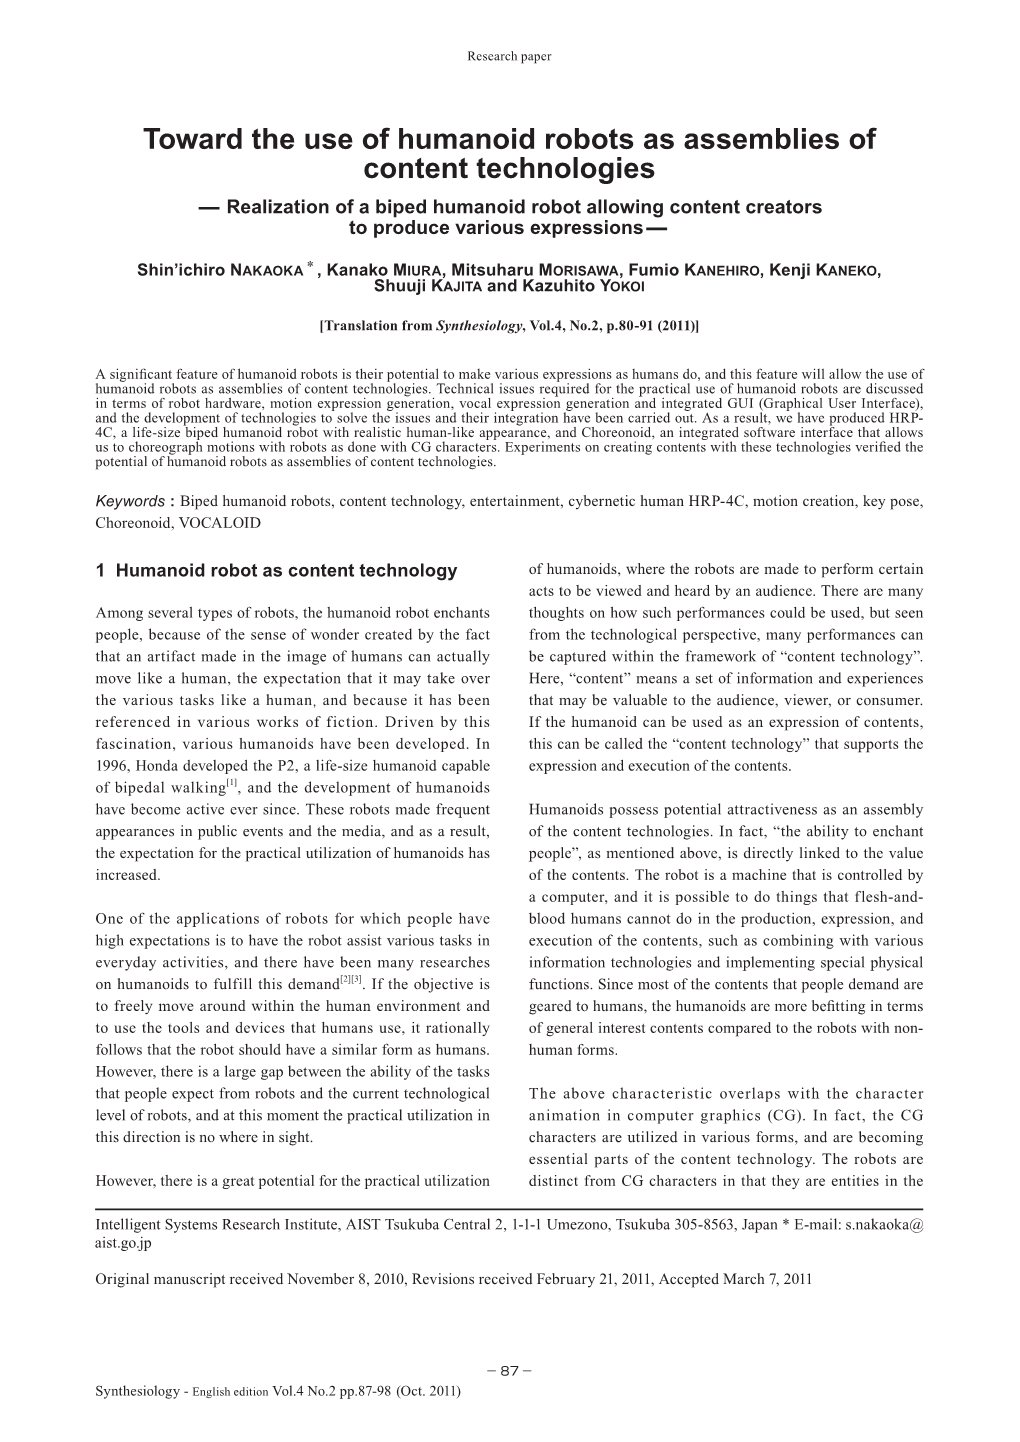 Synthesiology, Vol.4, No.2, P.80-91 (2011)]